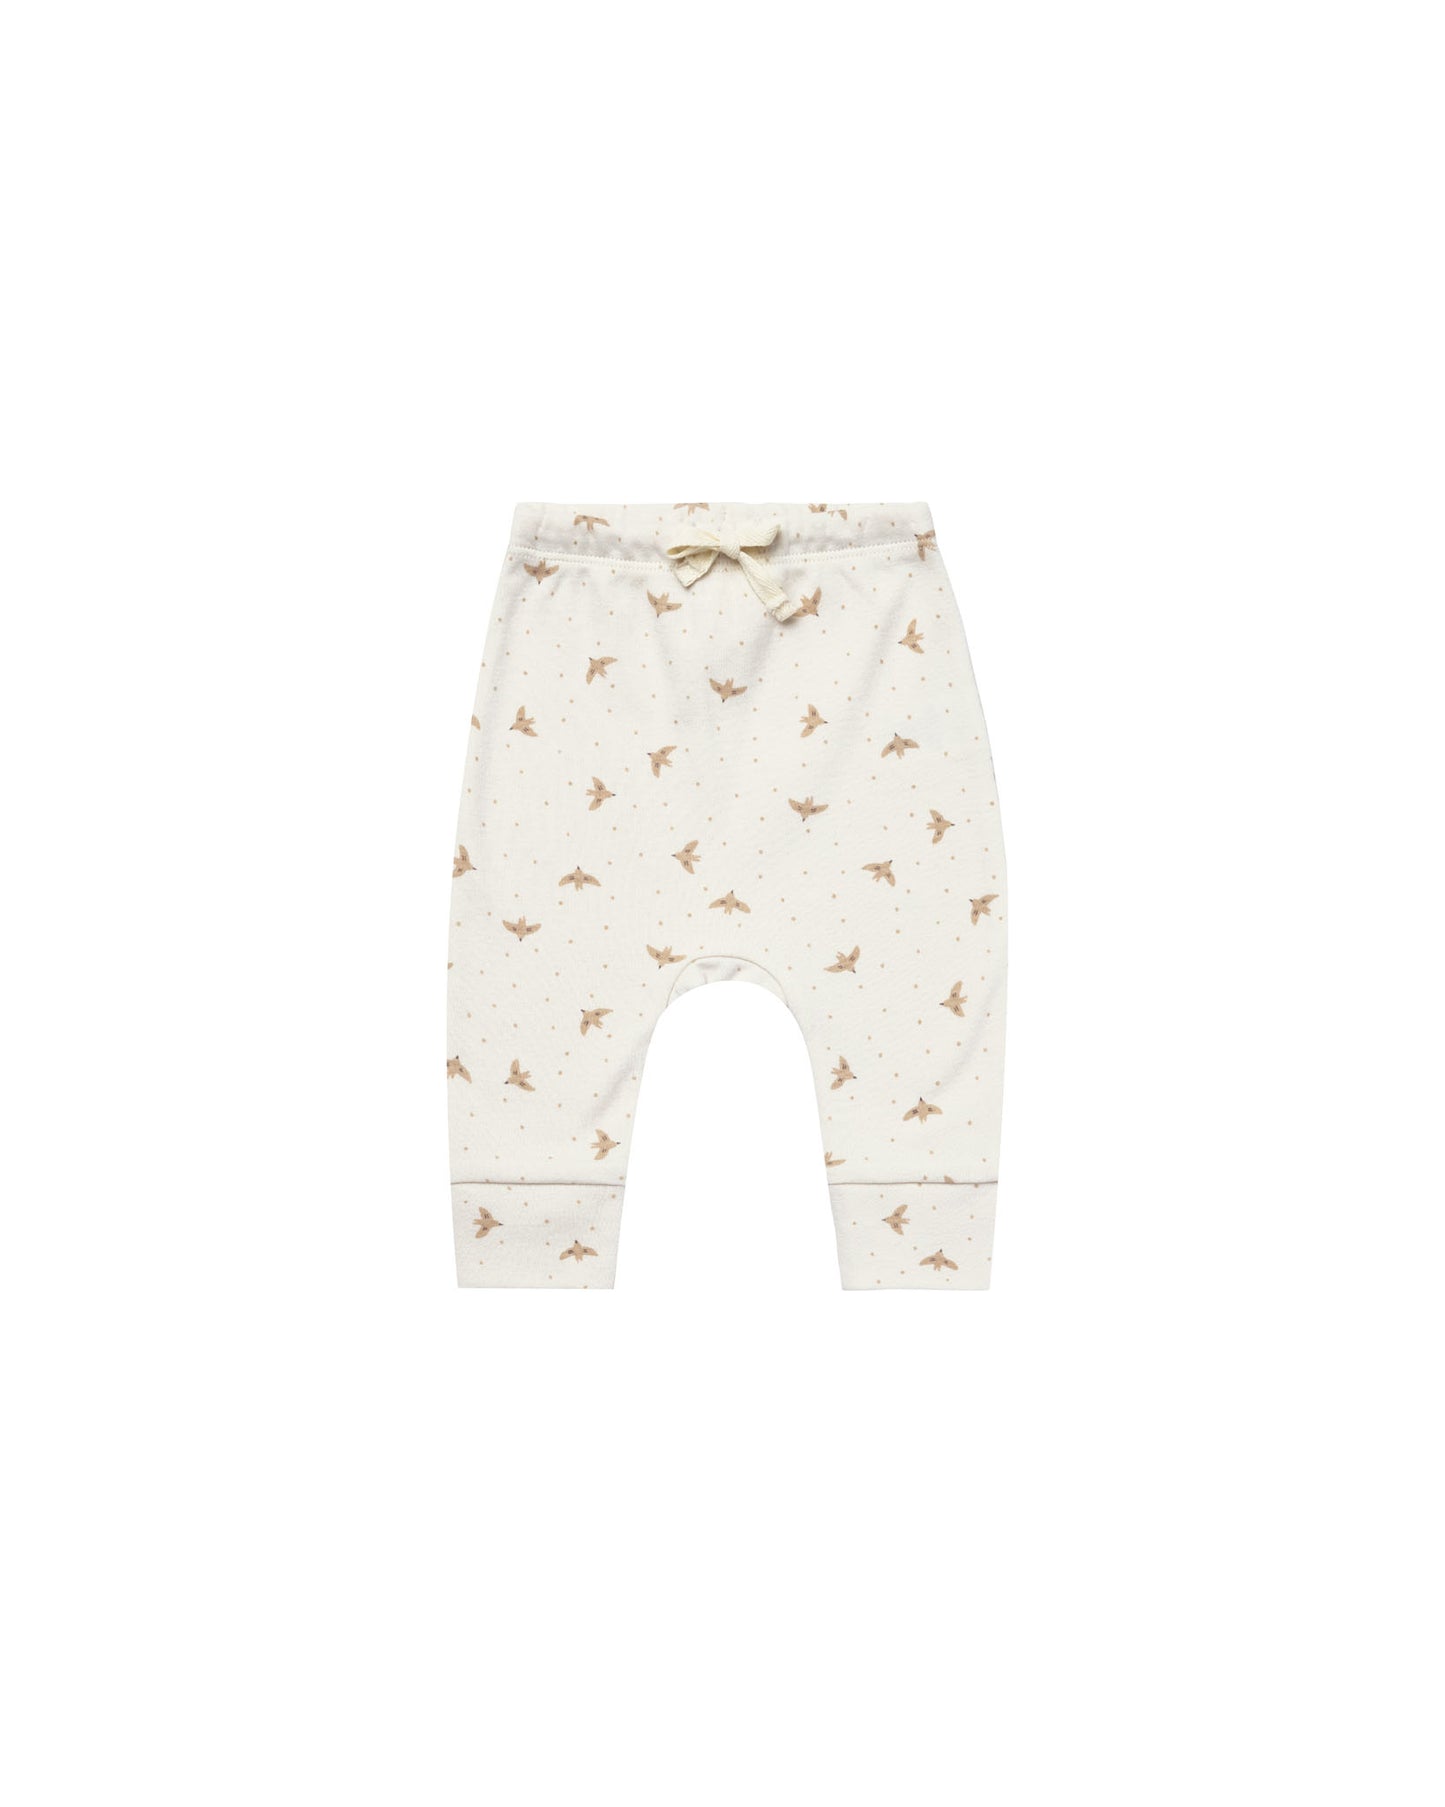 Quincy Mae Drawstring Pant Doves